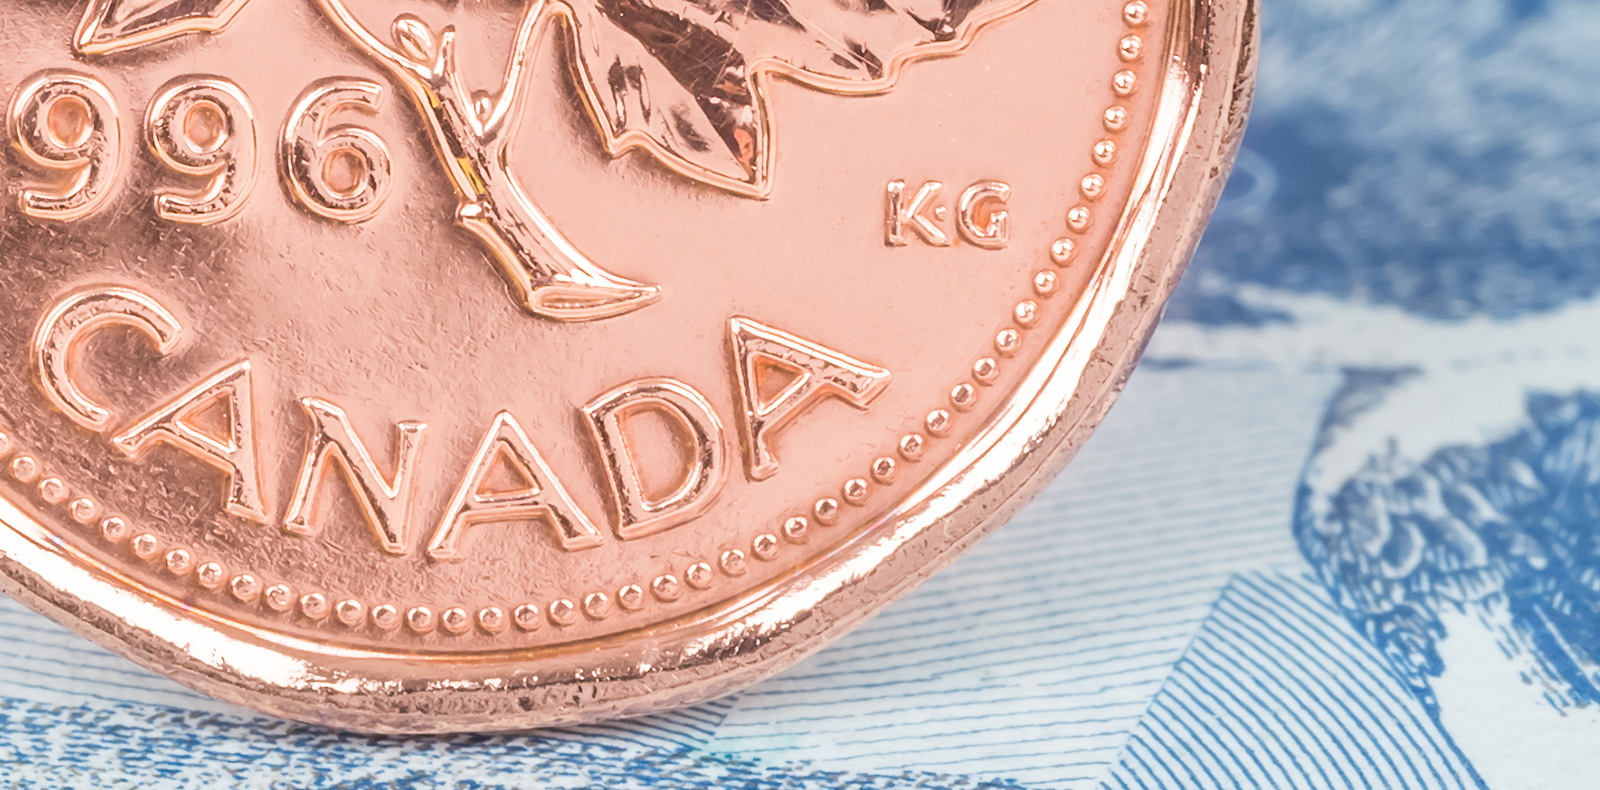 Clues for the Bank of Canada released today pivotal for ...